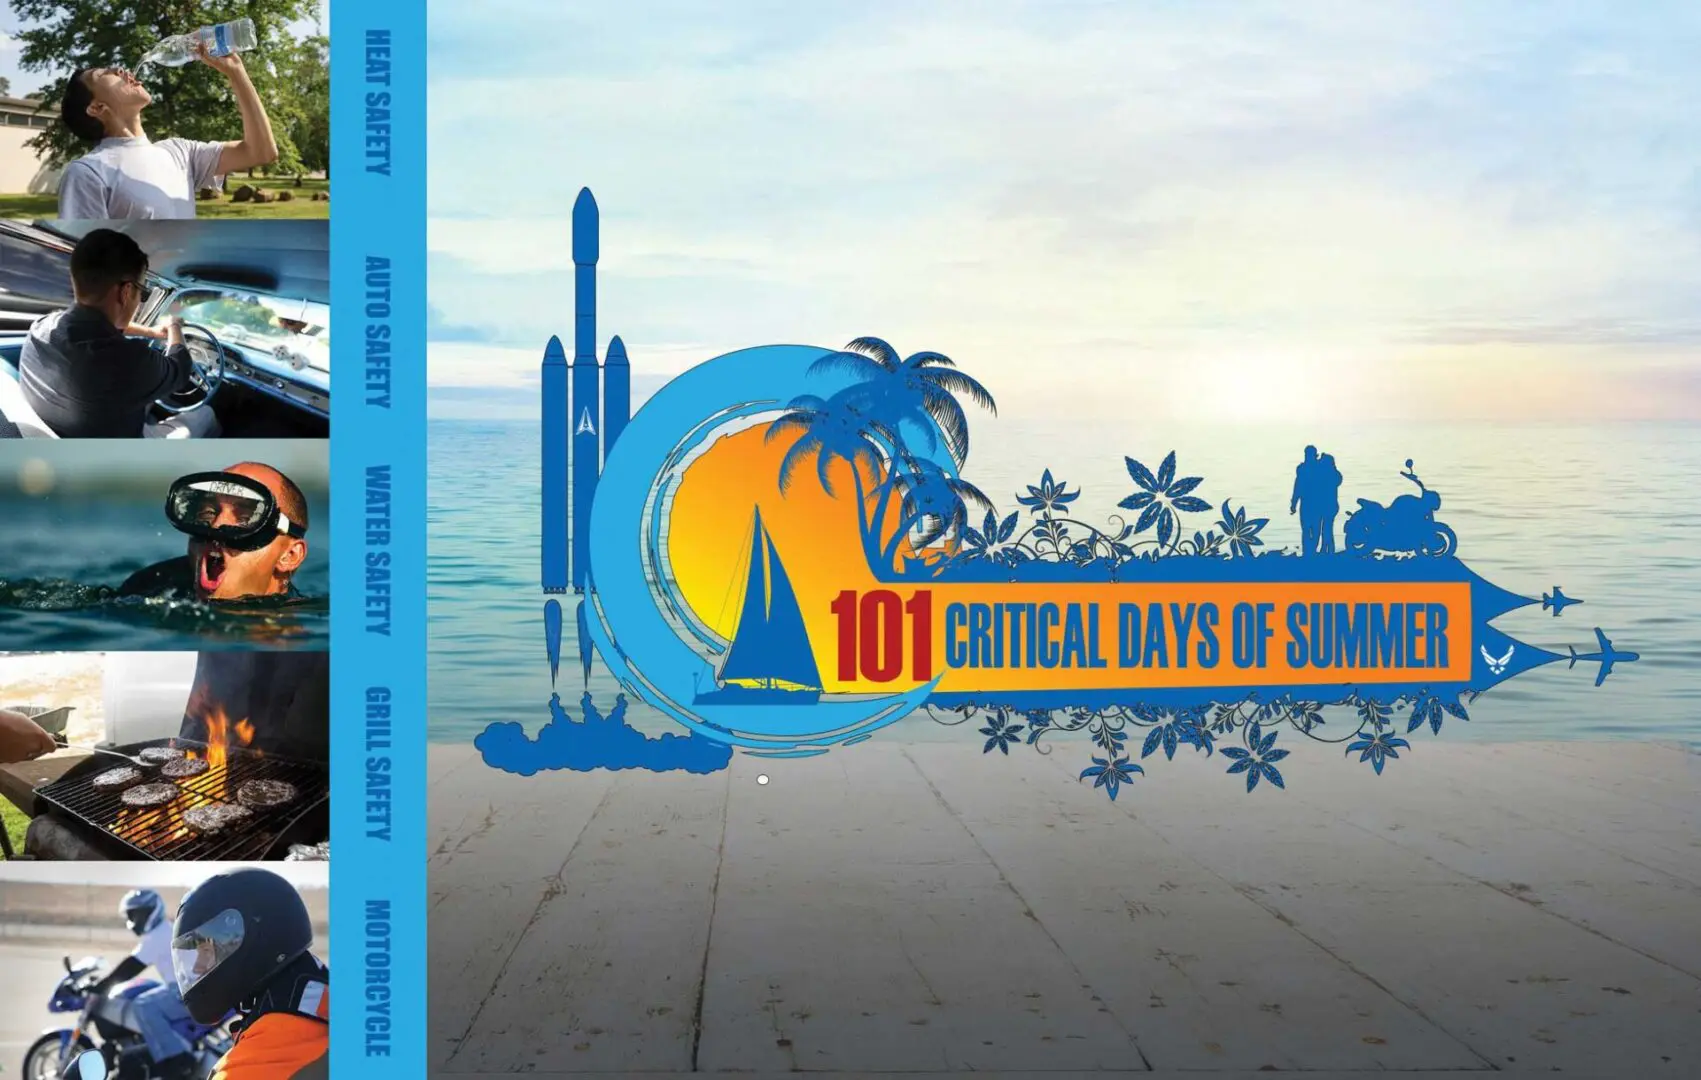 A blue and yellow cover of the book 1 0 1 critical days of summer.